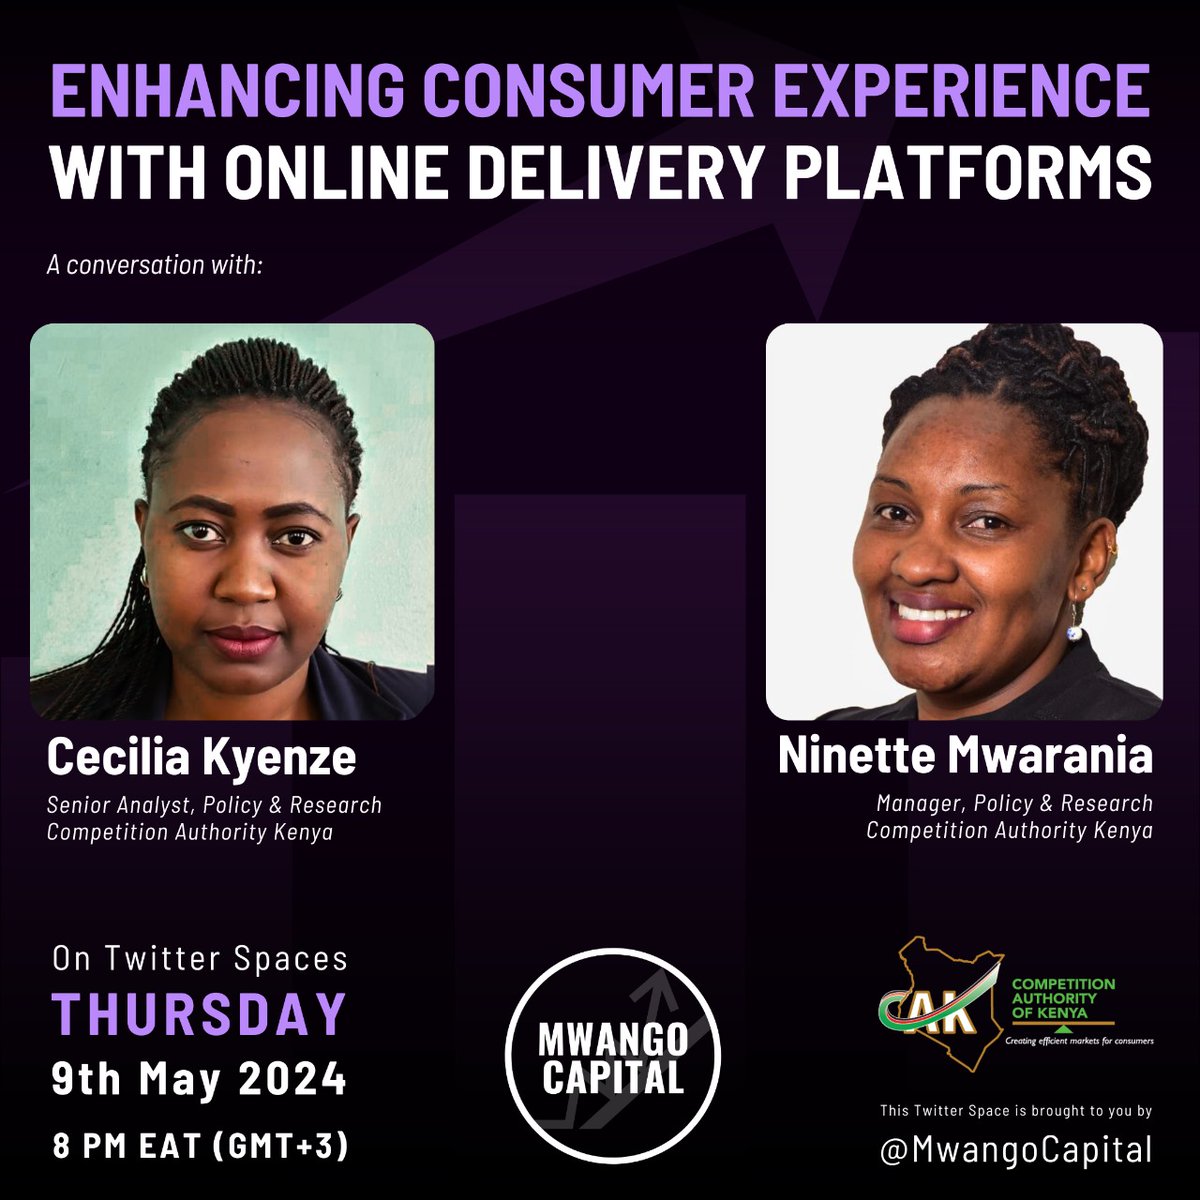 Tune into #MwangoSpaces tomorrow at 8pm EAT as CAK[@CAK_Kenya] delve into their role in enhancing consumer experience with online delivery platforms. Guests: —@CeciliaKyenze, Senior Analyst, Policy & Research. — @Nmwirigi, Manager Policy & Research.